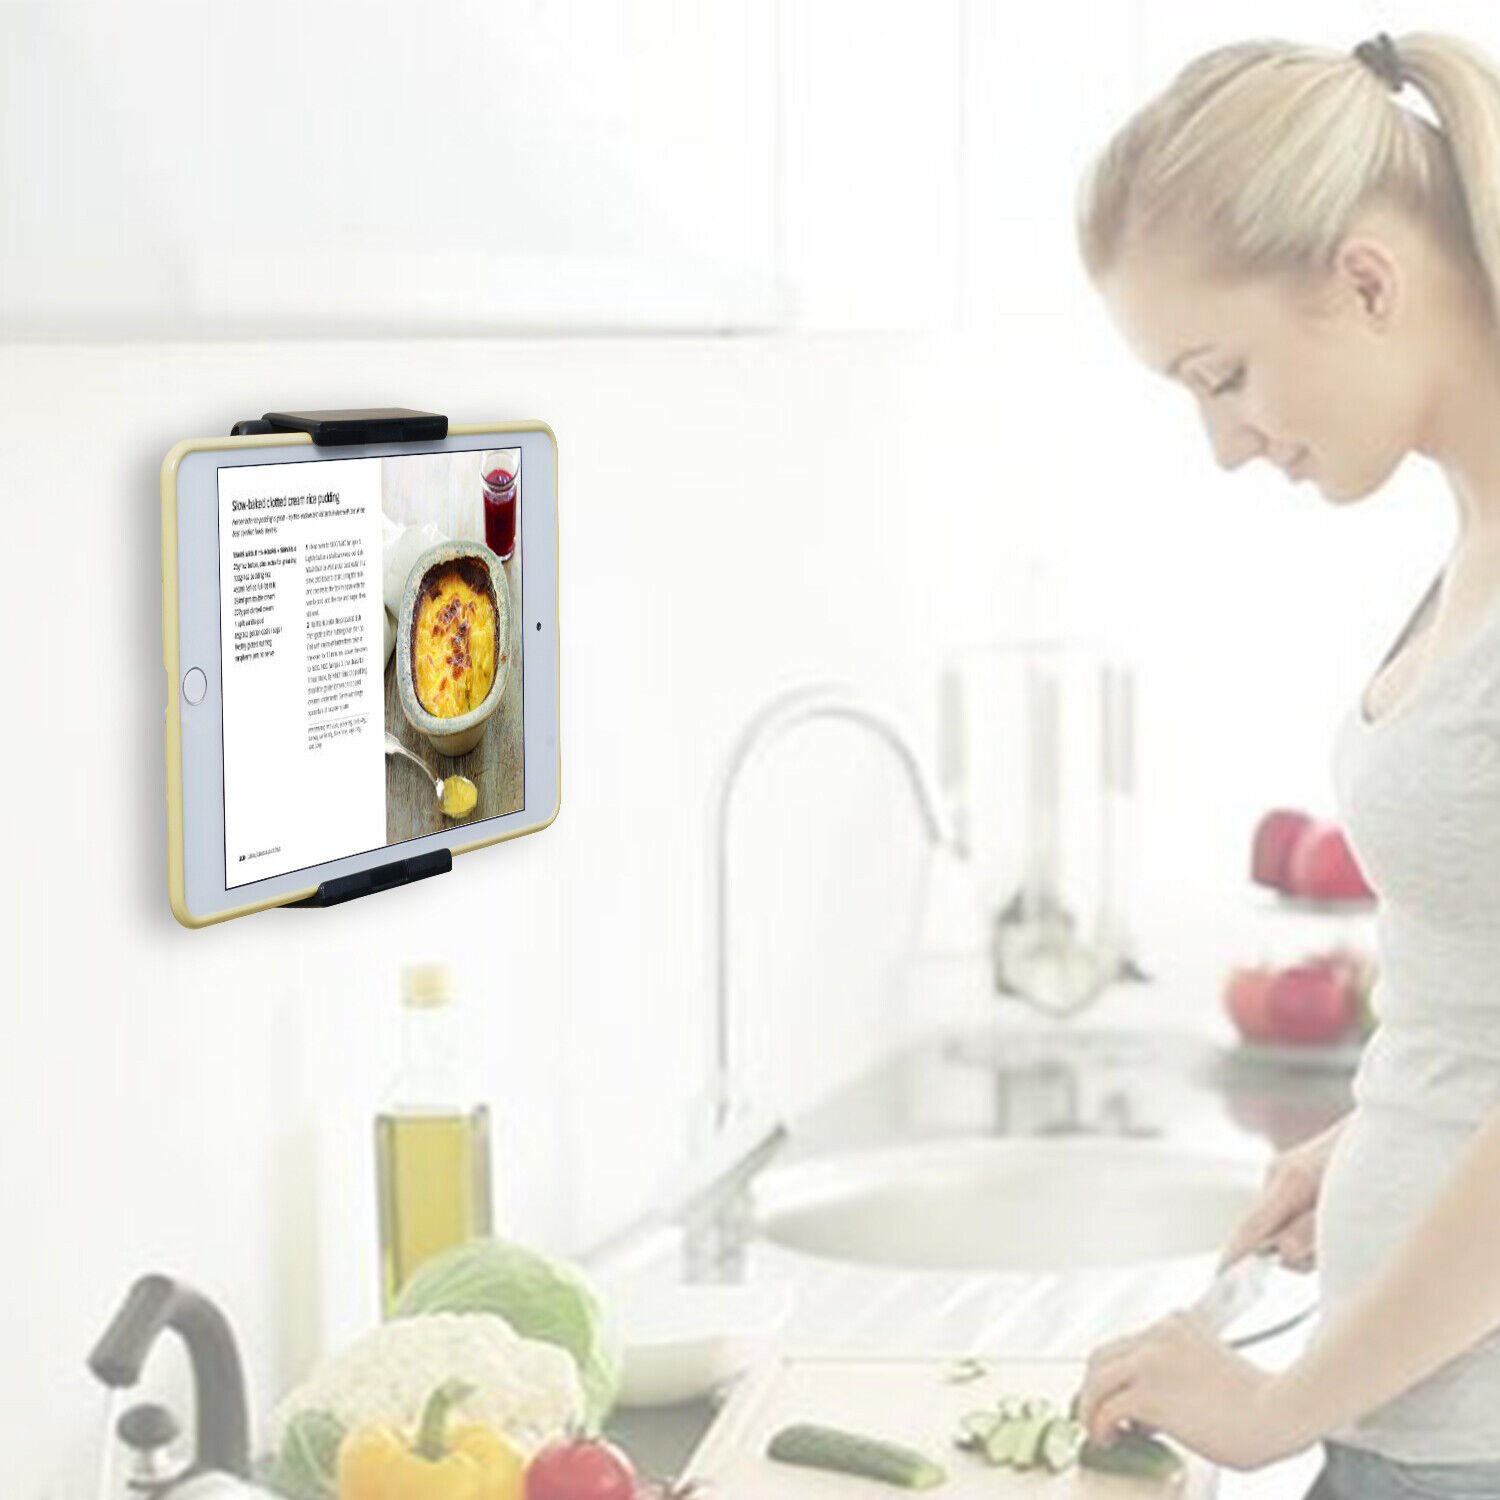 Universal Wall Mount, Kitchen Tablet Wall Holder for Tablets & Smartphones iPad